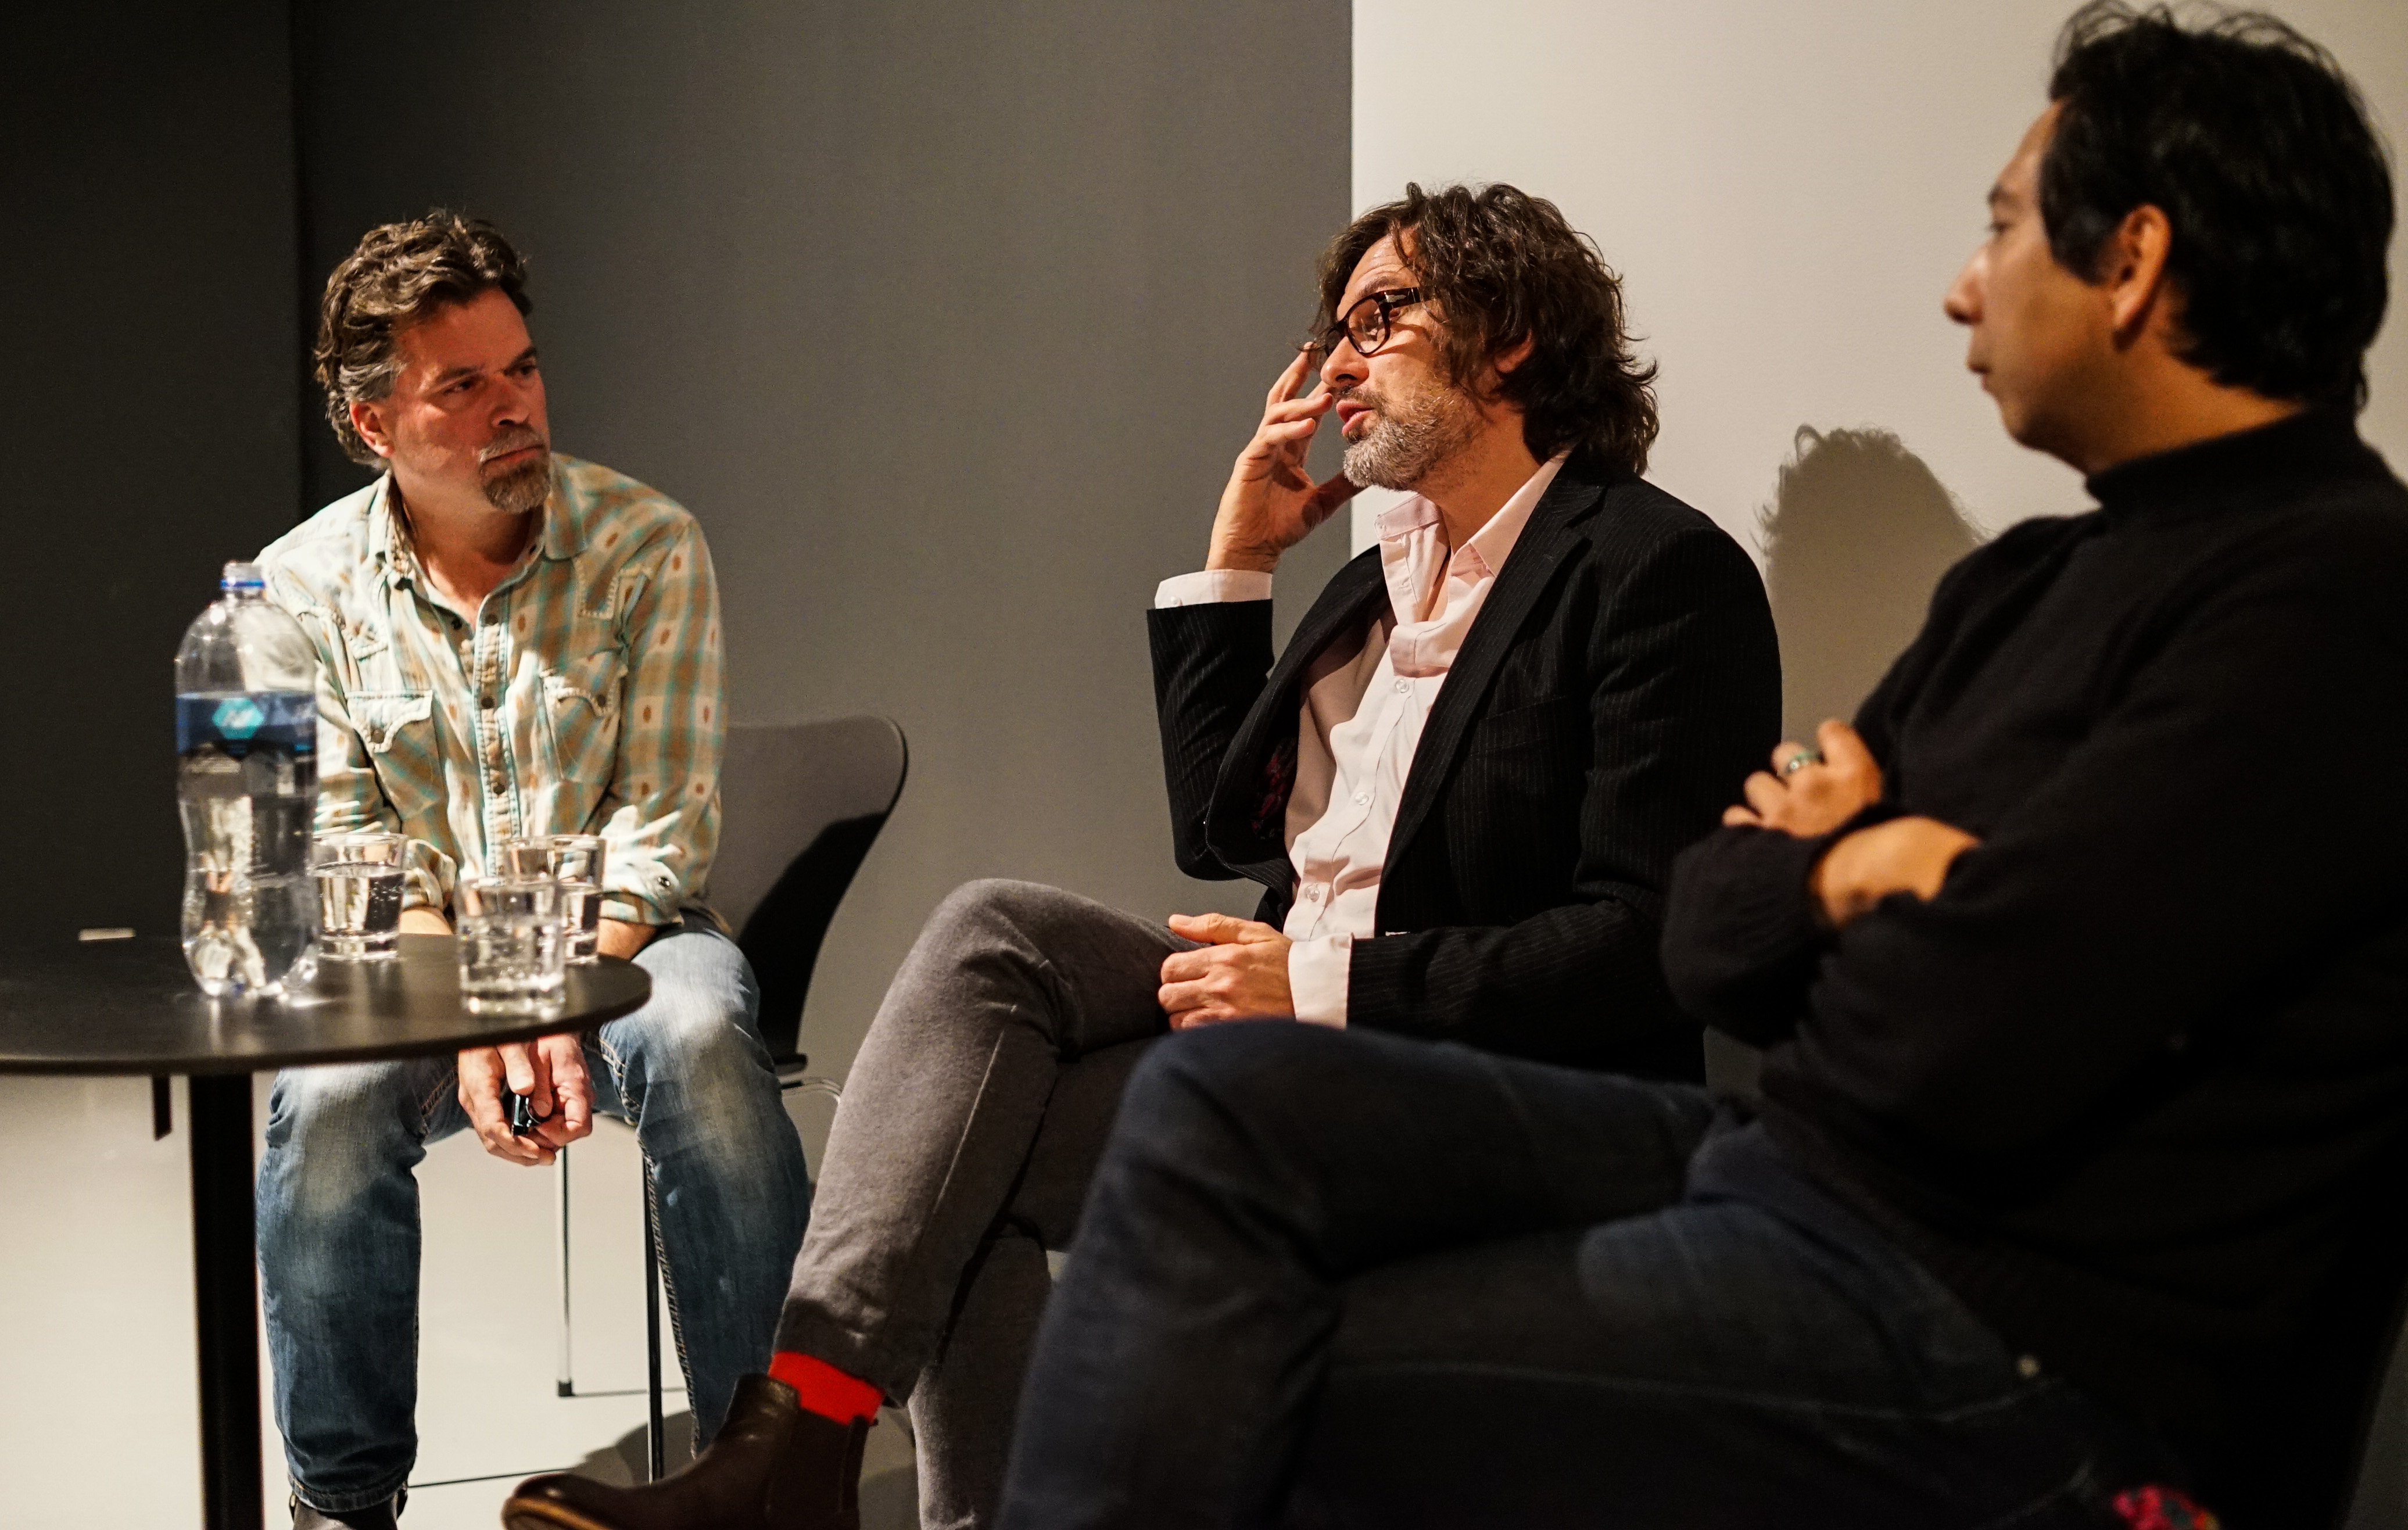 Michael Walsh, Marek Ranis and Sky Hopinka in discussion